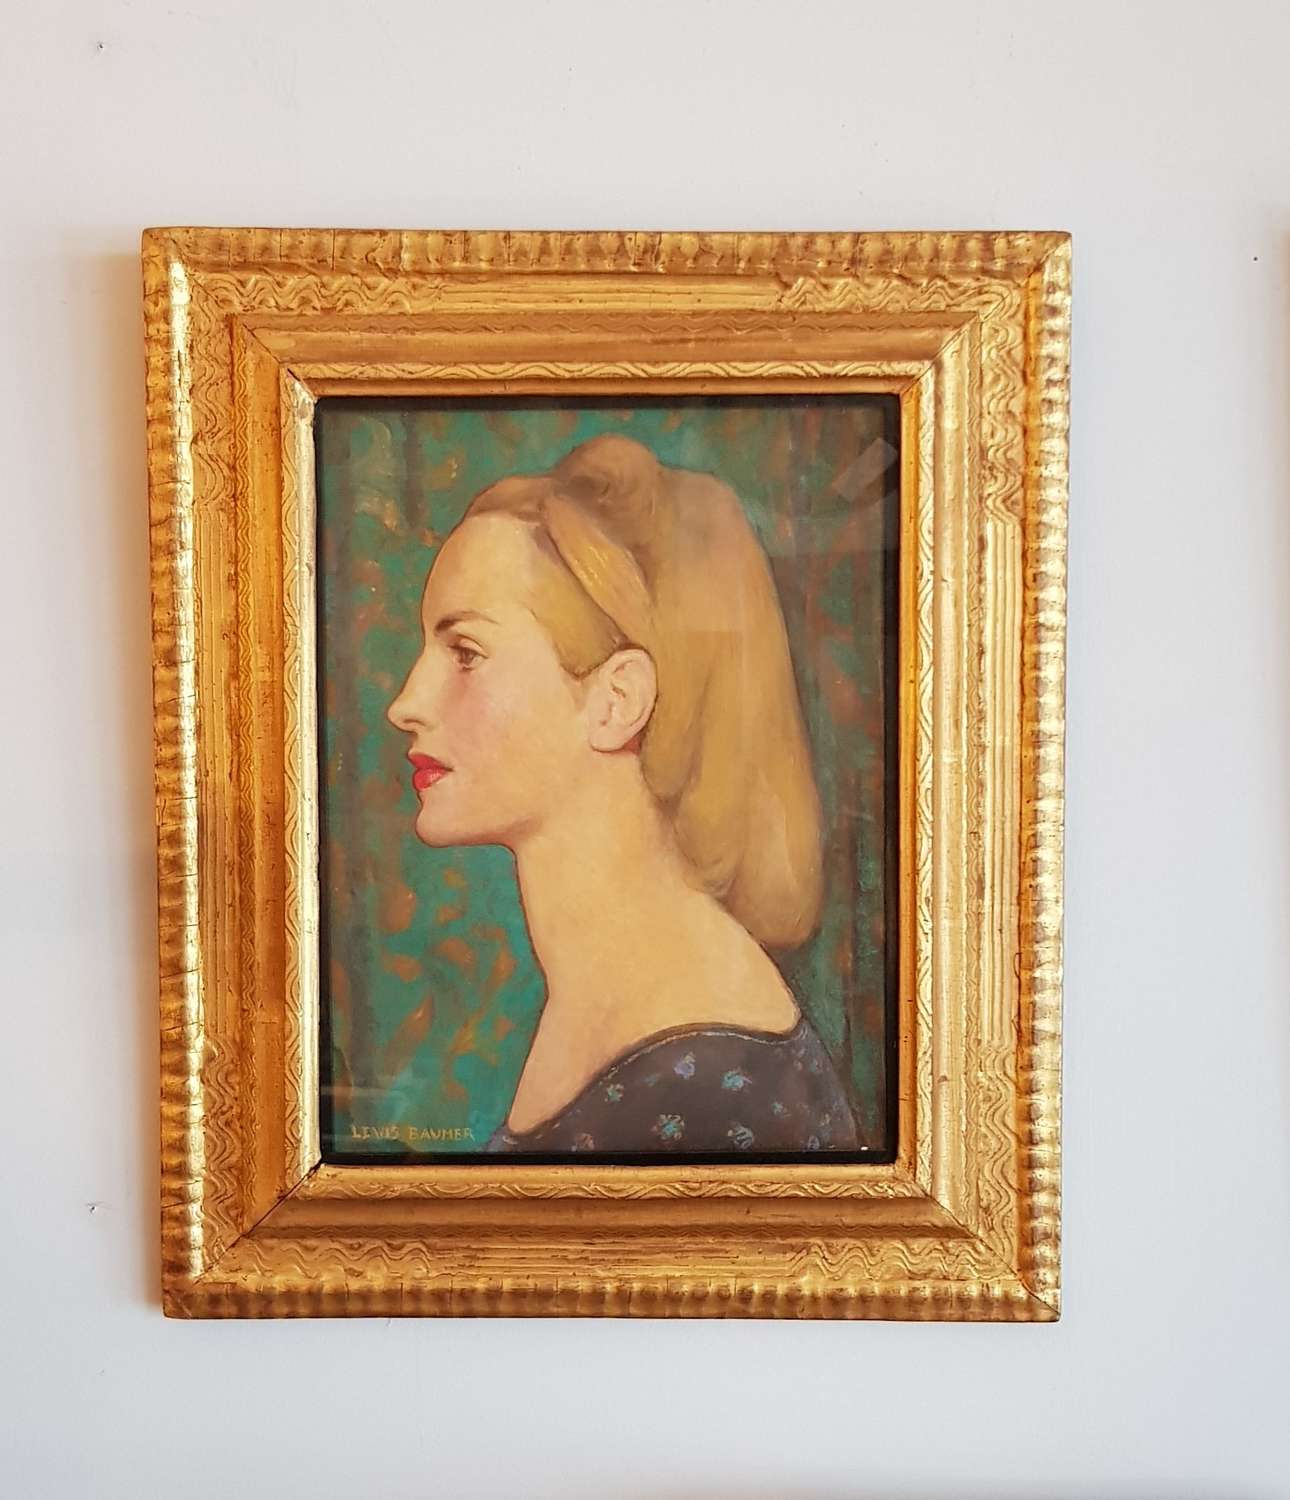 Early 20thC portrait painting of Venetia by Lewis Baumer